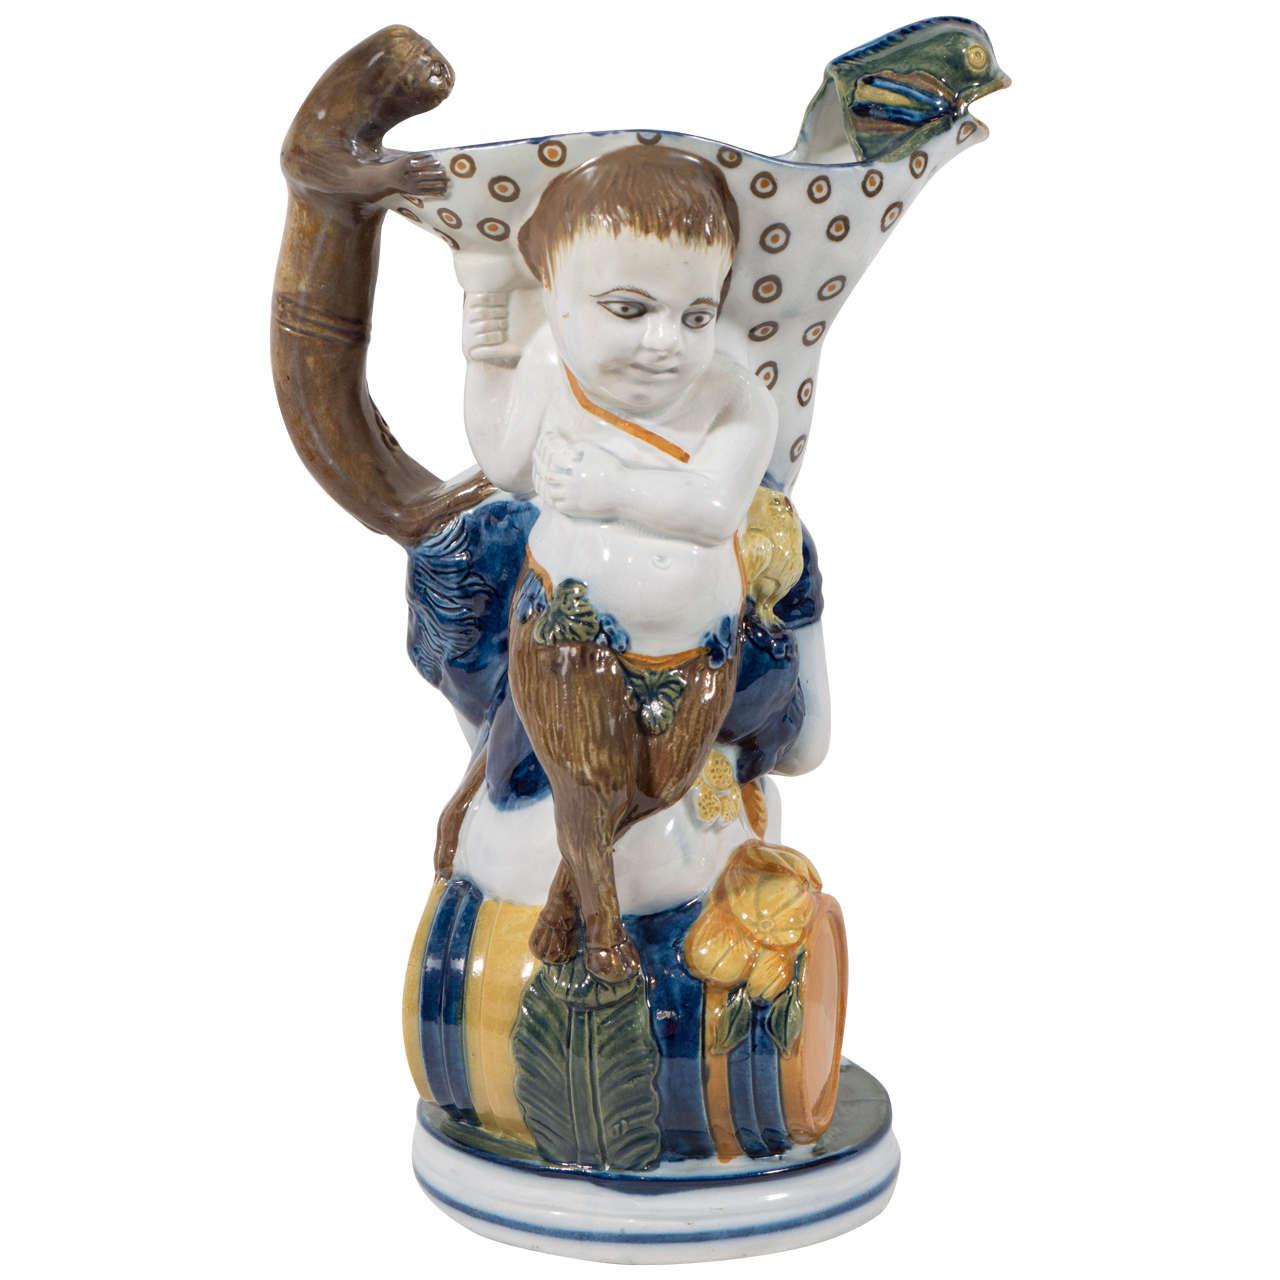 A Bacchus and Pan pottery relief molded Toby jug. With exceptionally detailed modeling of the figures: Te main figure of Bacchus is seated on a wine cask, a monkey standing on his shoulder becomes the handle for the pitcher, while the fish Bacchus